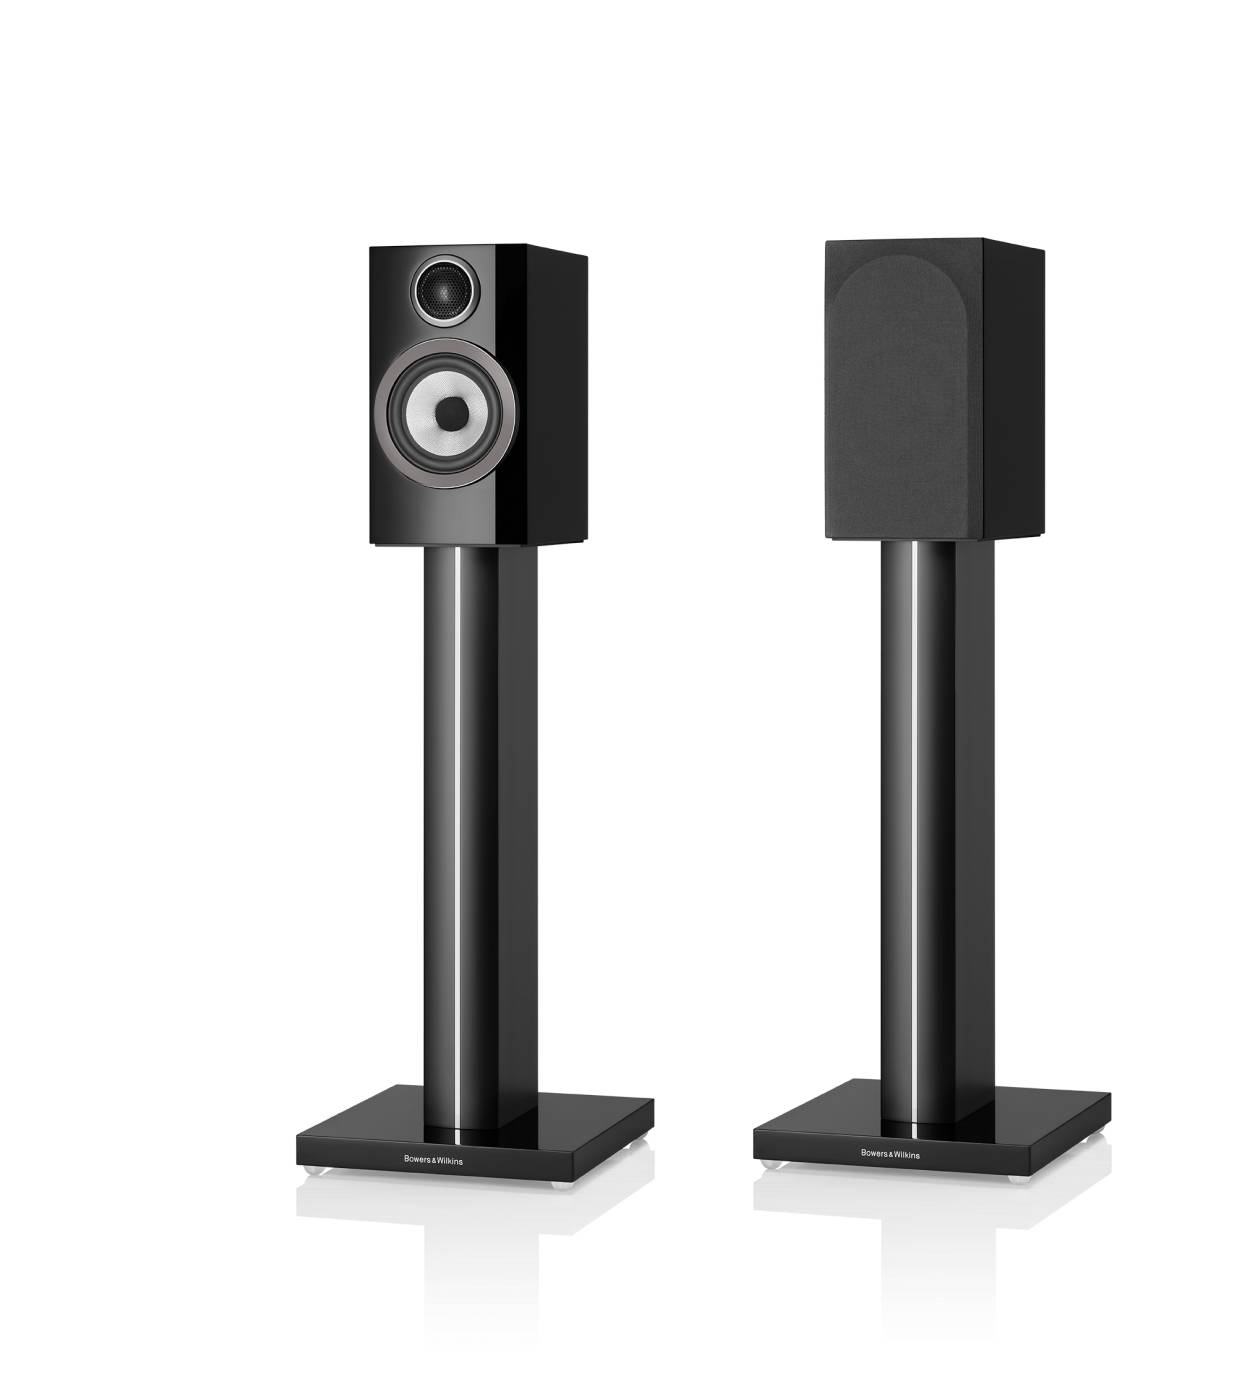 Bowers & Wilkins-Bower & Wilkins 707 S3 pair without stands-PremiumHIFI